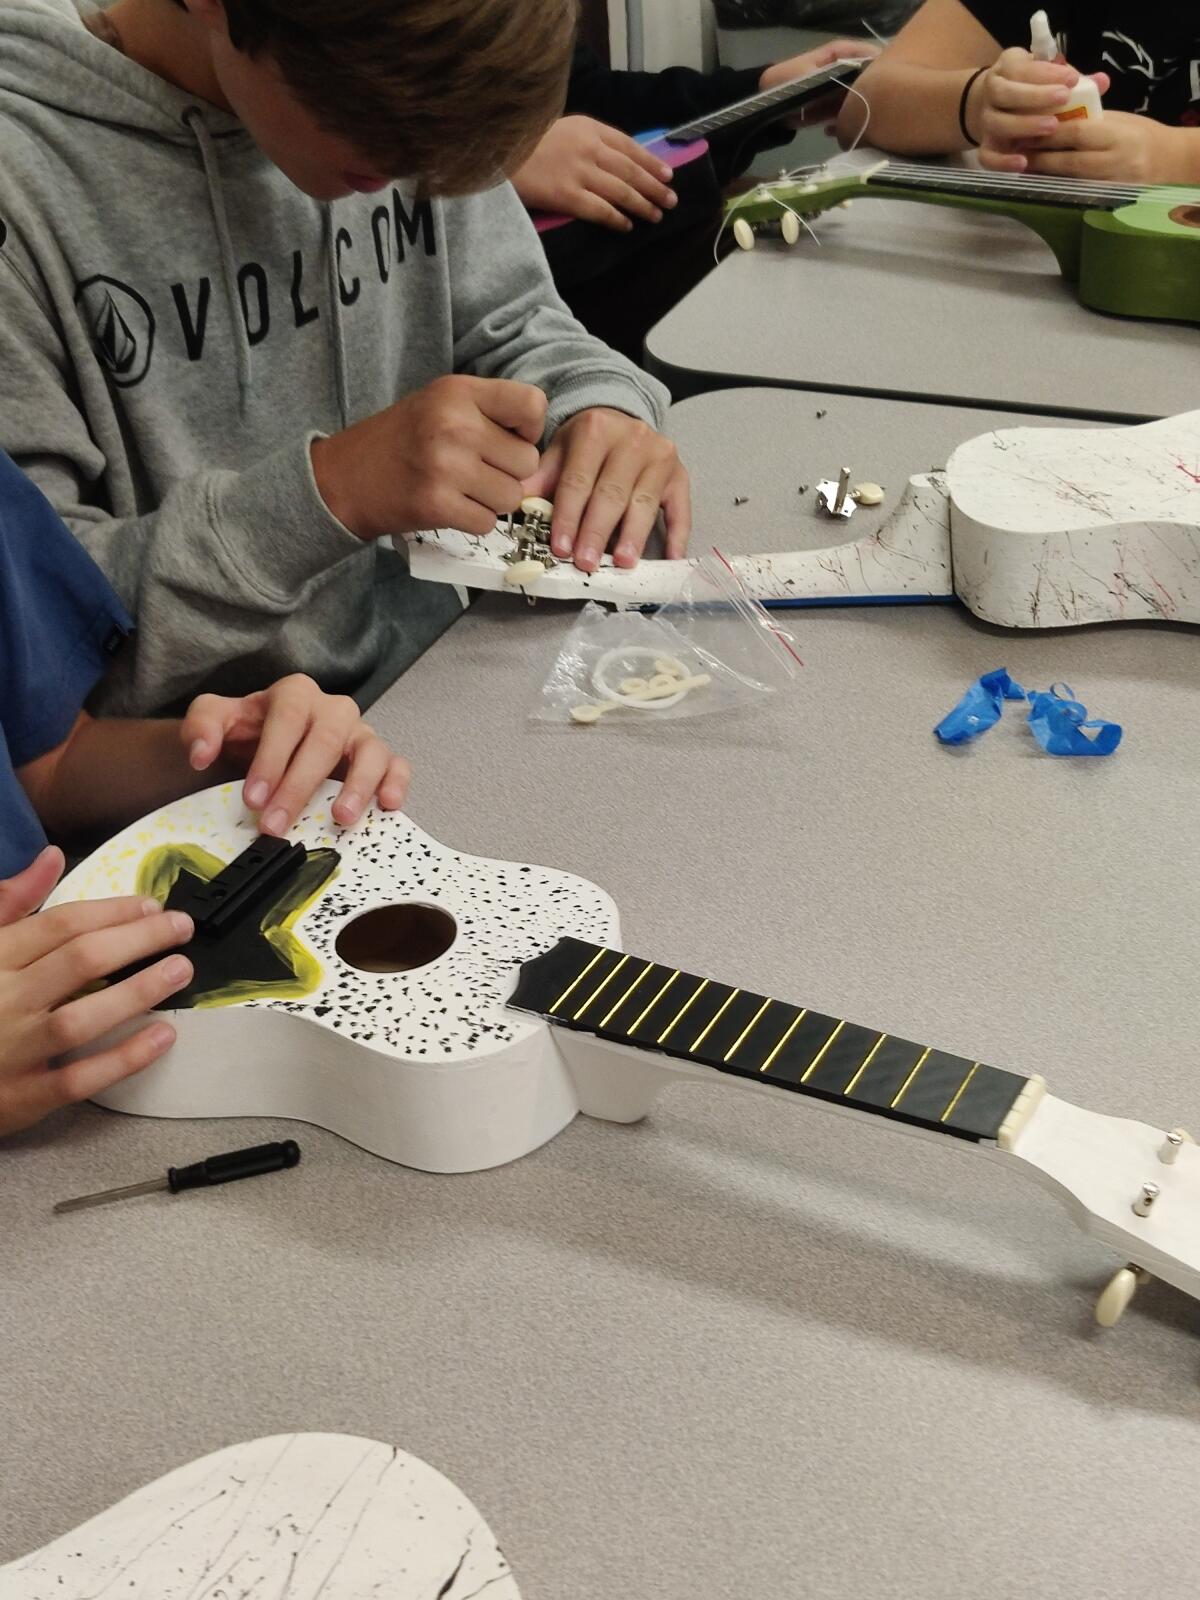 Dwyer Middle School students made ukuleles as part of the "Just Keep Strumming" school art project.